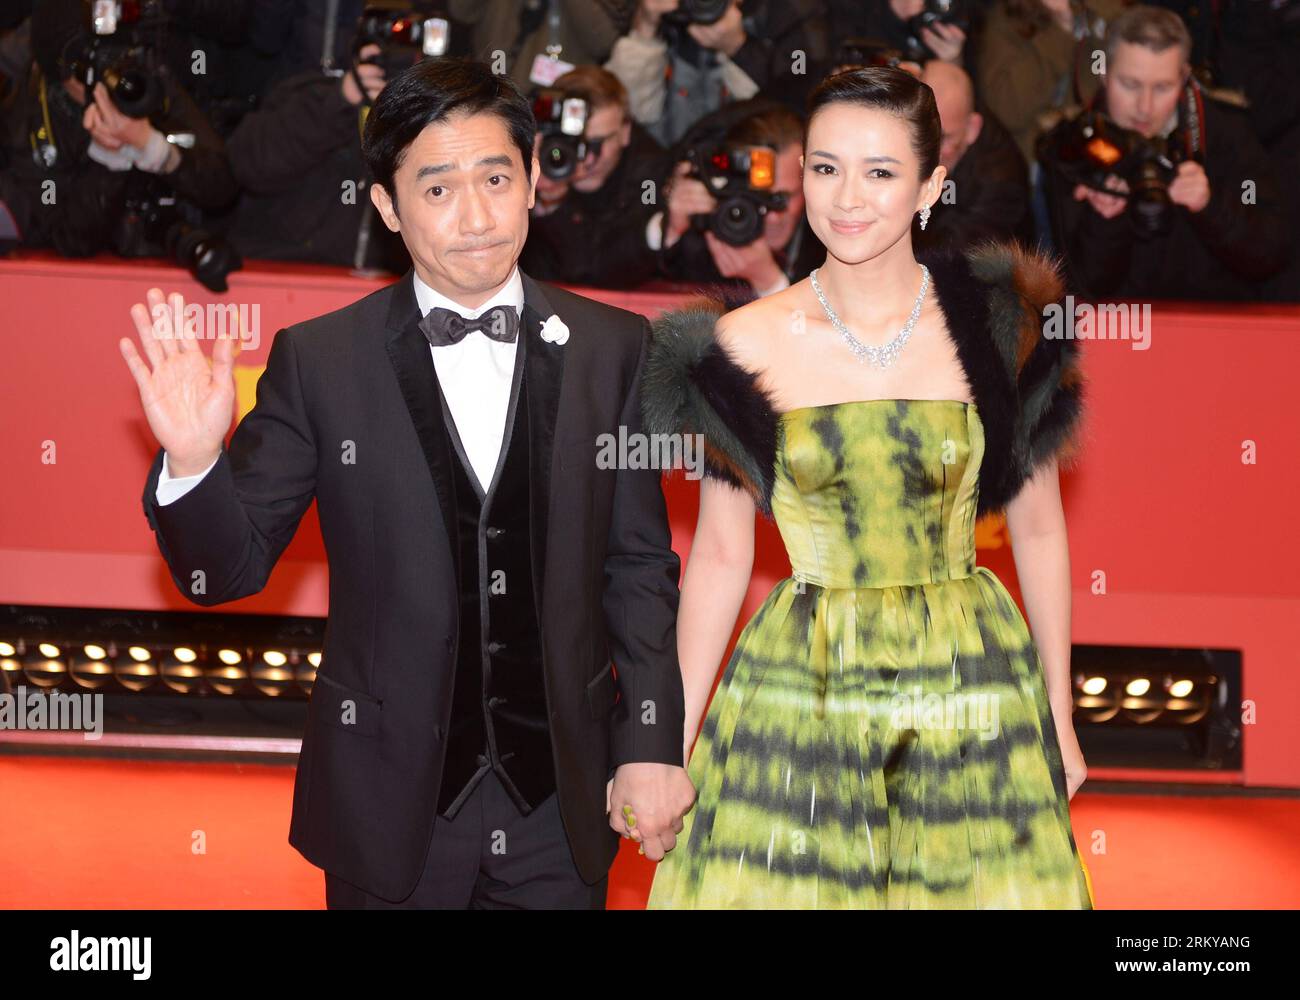 Bildnummer: 59188759  Datum: 07.02.2013  Copyright: imago/Xinhua Chinese actor Tony Leung (L) and Chinese actress Zhang Ziyi arrive on the red carpet for the opening ceremony of the 63rd Berlin film festival in Berlin, Germany, on Feb. 7, 2013. The 63rd Berlin film festival opened Thursday with a martial arts epic The grandmaster of Chinese director Wong Kar Wai who will also lead the jury of this Berlinale. (Xinhua/Ma Ning) GERMANY-BERLIN-ENTERTAINMENT-FILM-FESTIVAL PUBLICATIONxNOTxINxCHN Kultur Entertainment People Film Festival Filmfestival 63 Internationale Berlinale x0x xdd premiumd 2013 Stock Photo